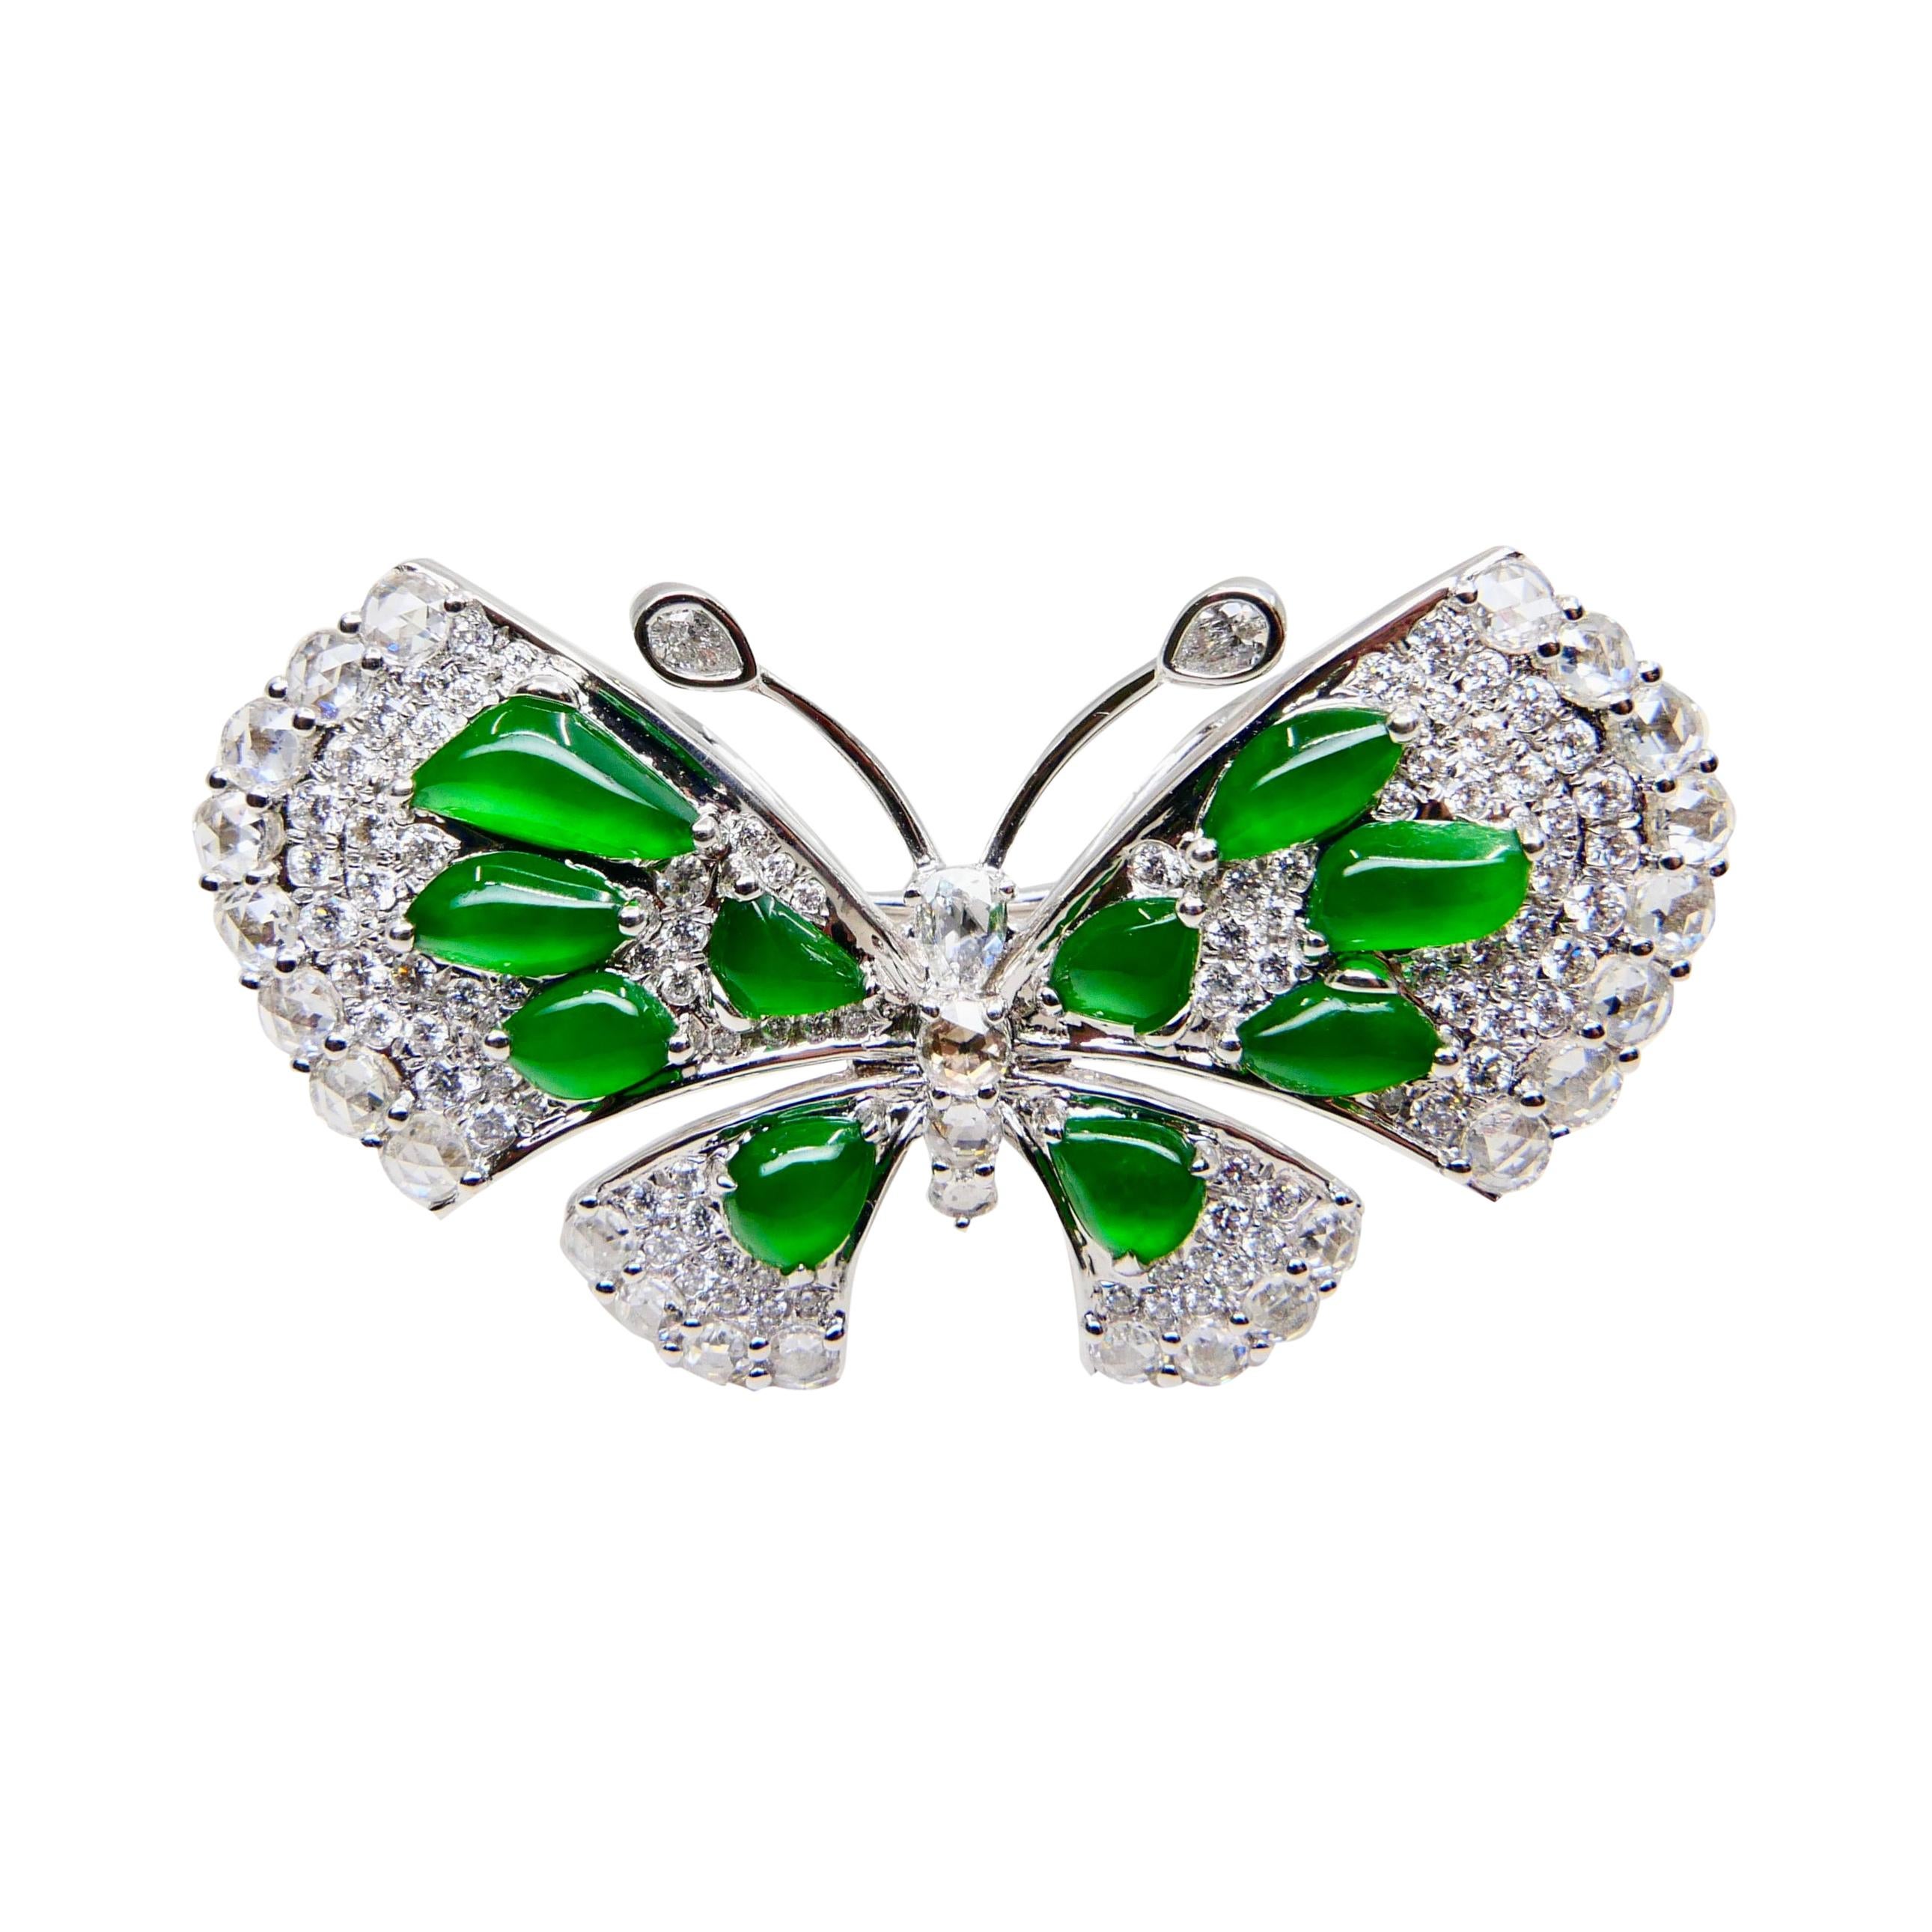 Certified Imperial Green Jade Butterfly & Rose Cut Diamond Ring, Pendant, Brooch For Sale 2